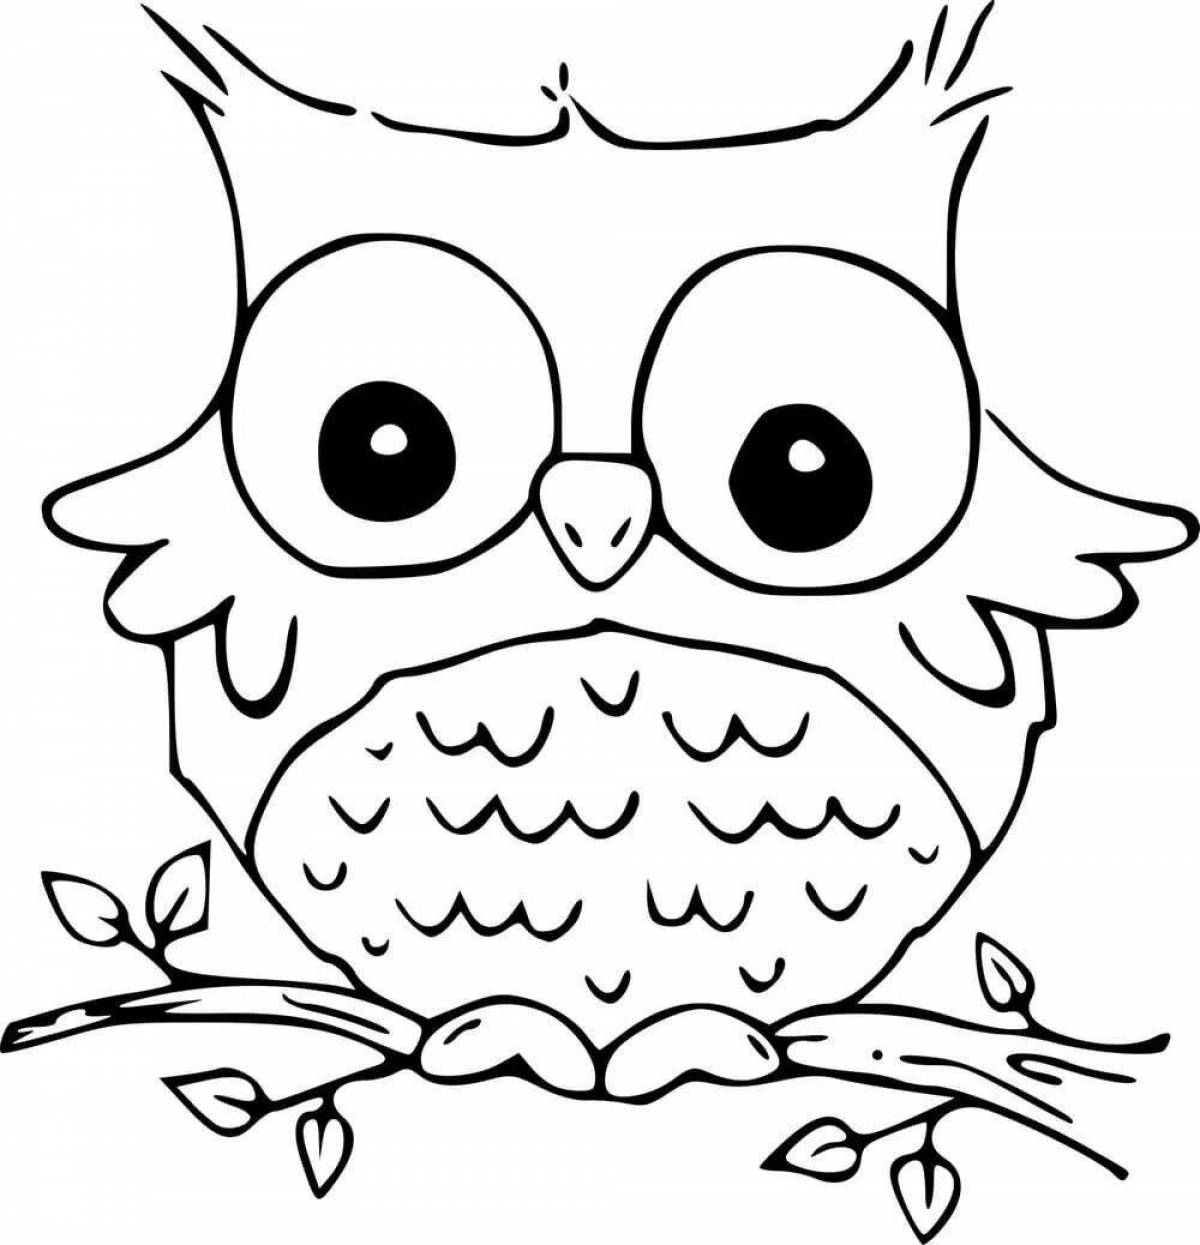 Live coloring drawing of an owl